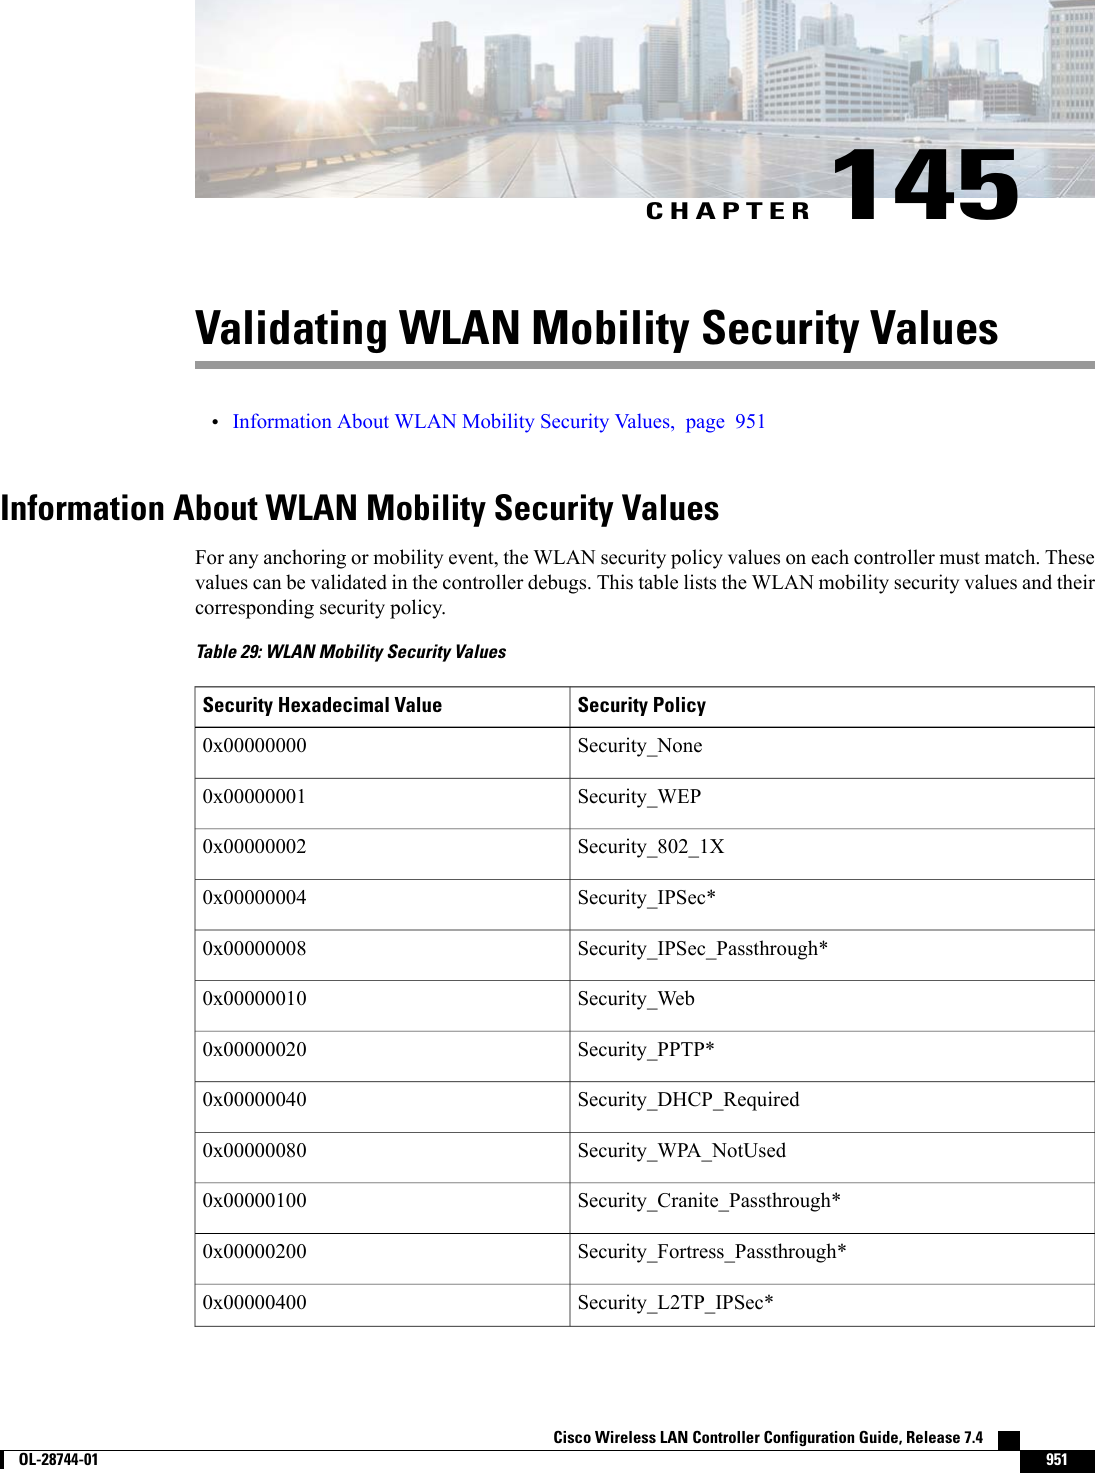 CHAPTER 145Validating WLAN Mobility Security Values•Information About WLAN Mobility Security Values, page 951Information About WLAN Mobility Security ValuesFor any anchoring or mobility event, the WLAN security policy values on each controller must match. Thesevalues can be validated in the controller debugs. This table lists the WLAN mobility security values and theircorresponding security policy.Table 29: WLAN Mobility Security ValuesSecurity PolicySecurity Hexadecimal ValueSecurity_None0x00000000Security_WEP0x00000001Security_802_1X0x00000002Security_IPSec*0x00000004Security_IPSec_Passthrough*0x00000008Security_Web0x00000010Security_PPTP*0x00000020Security_DHCP_Required0x00000040Security_WPA_NotUsed0x00000080Security_Cranite_Passthrough*0x00000100Security_Fortress_Passthrough*0x00000200Security_L2TP_IPSec*0x00000400Cisco Wireless LAN Controller Configuration Guide, Release 7.4        OL-28744-01 951